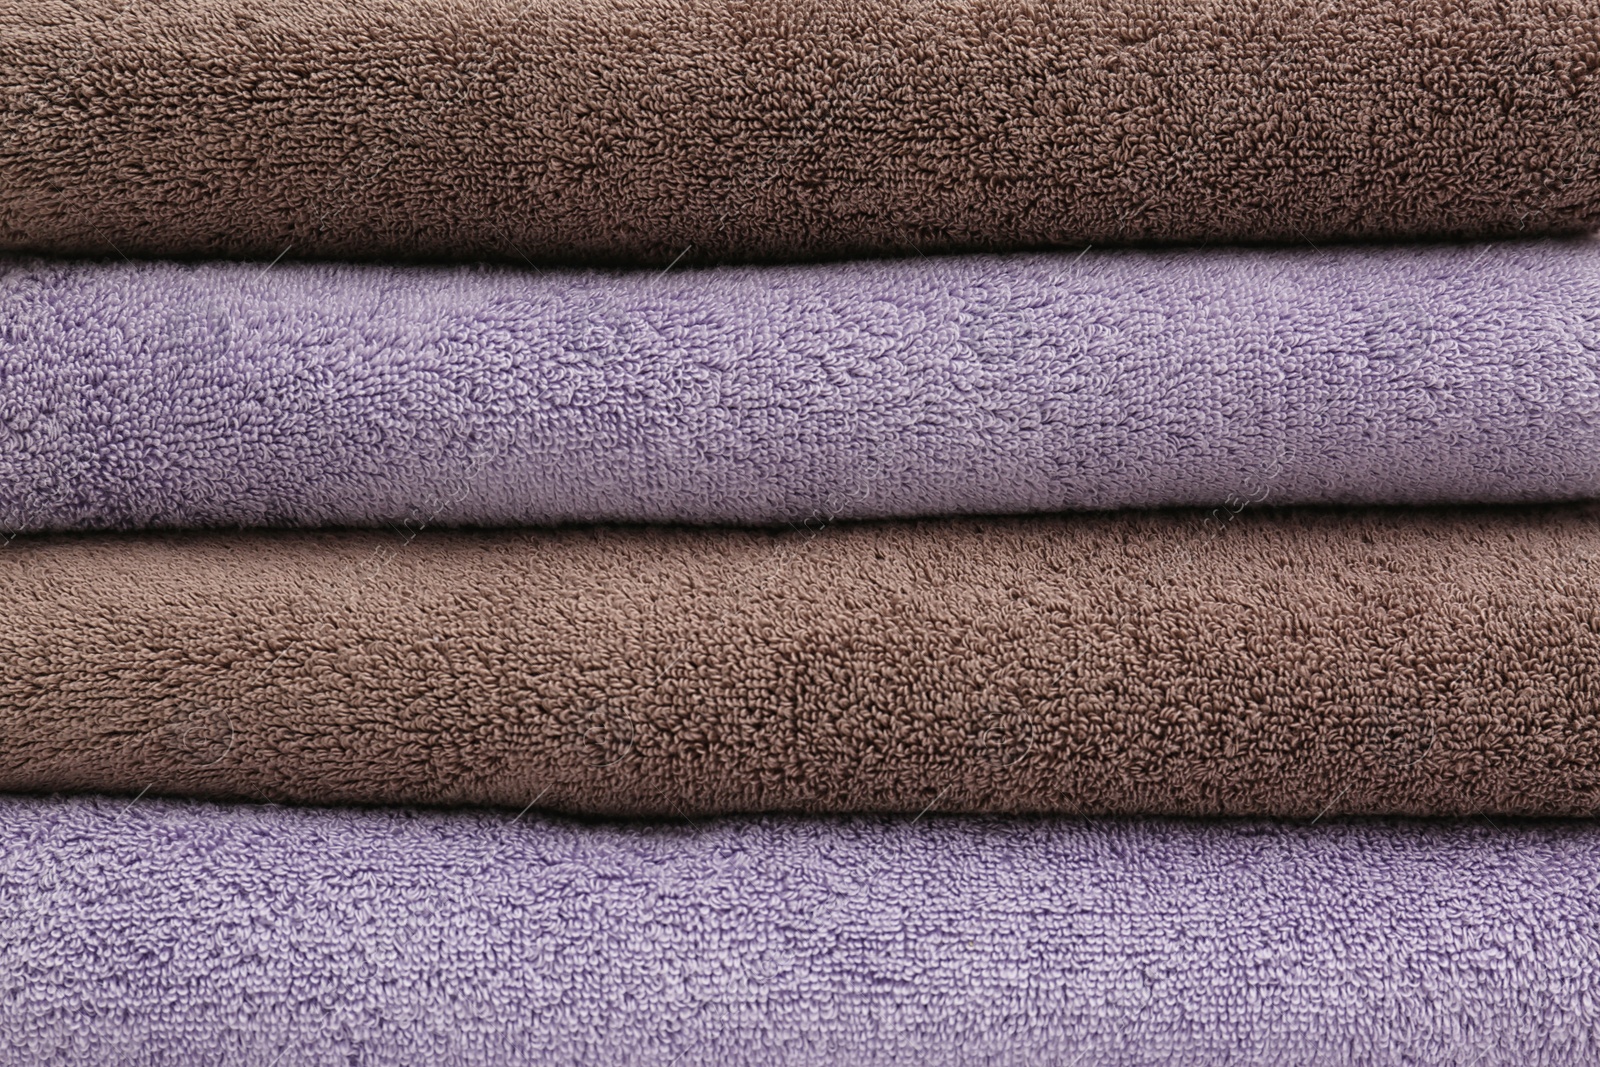 Photo of Stack of folded soft colorful towels as background